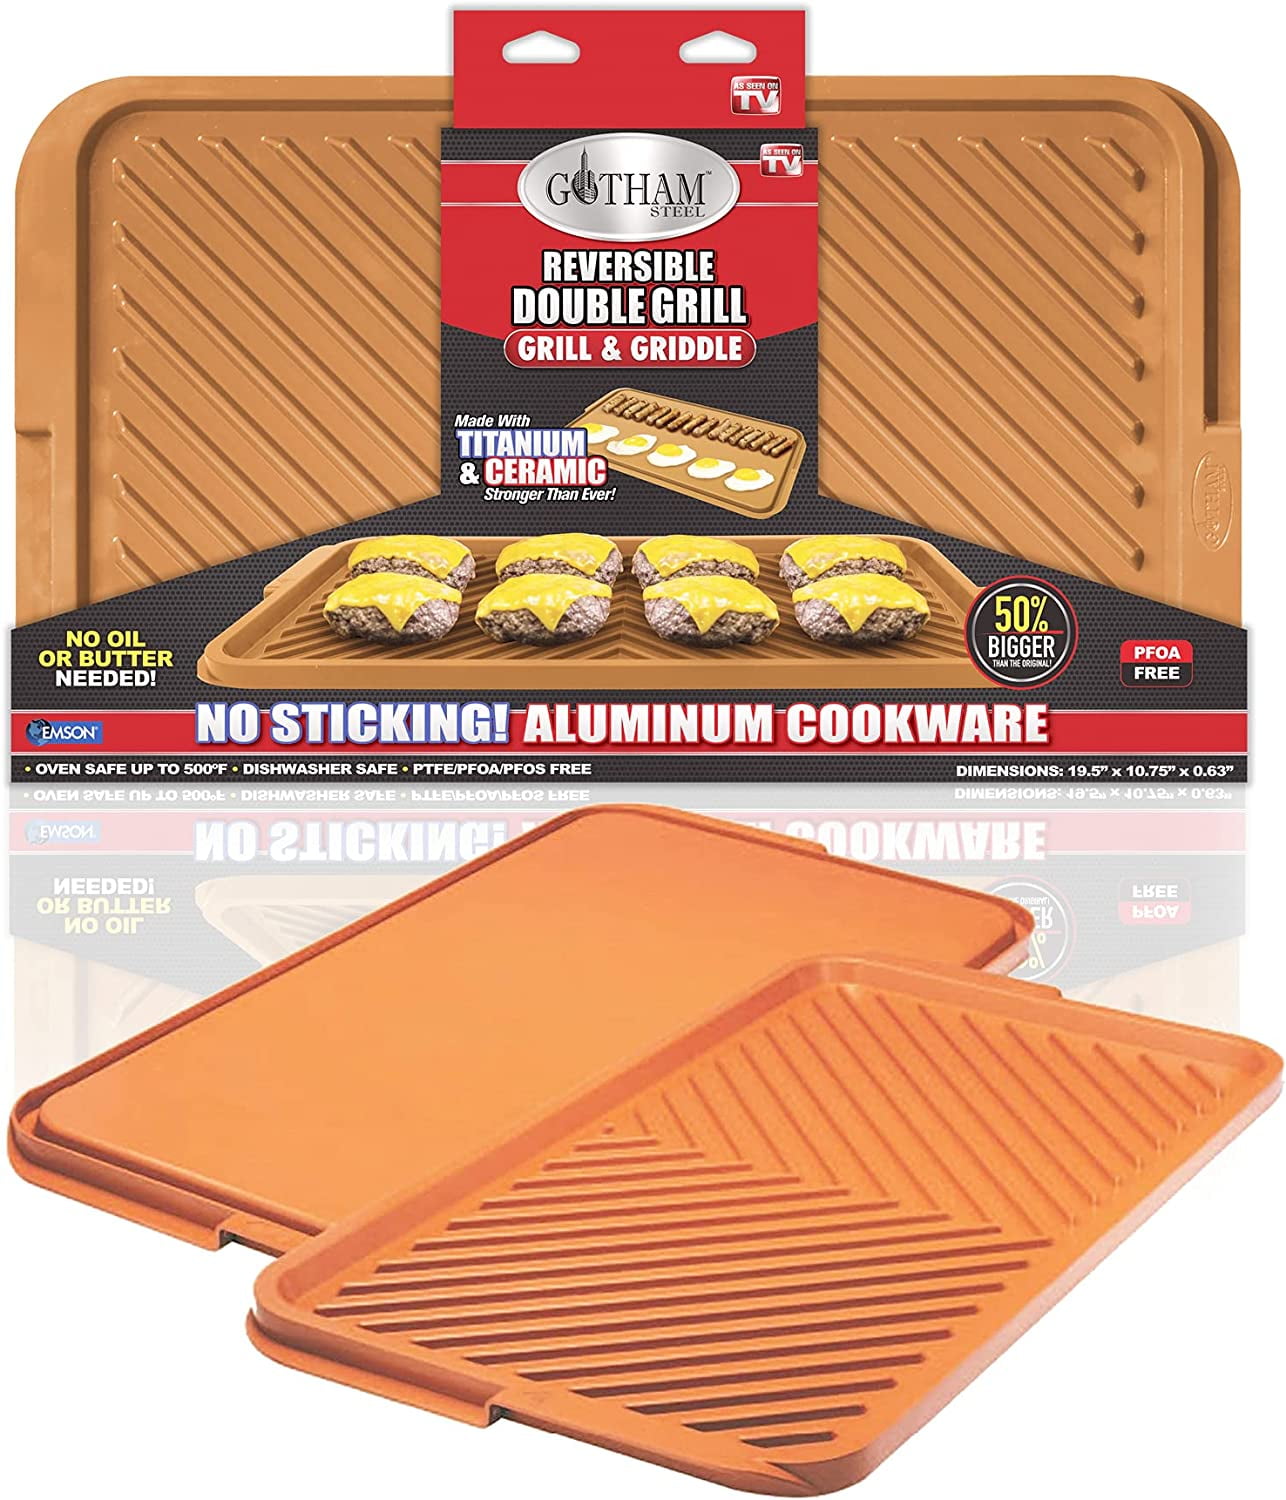 All American Double Burner Reversible Grill/Griddle with Ceramic Coating